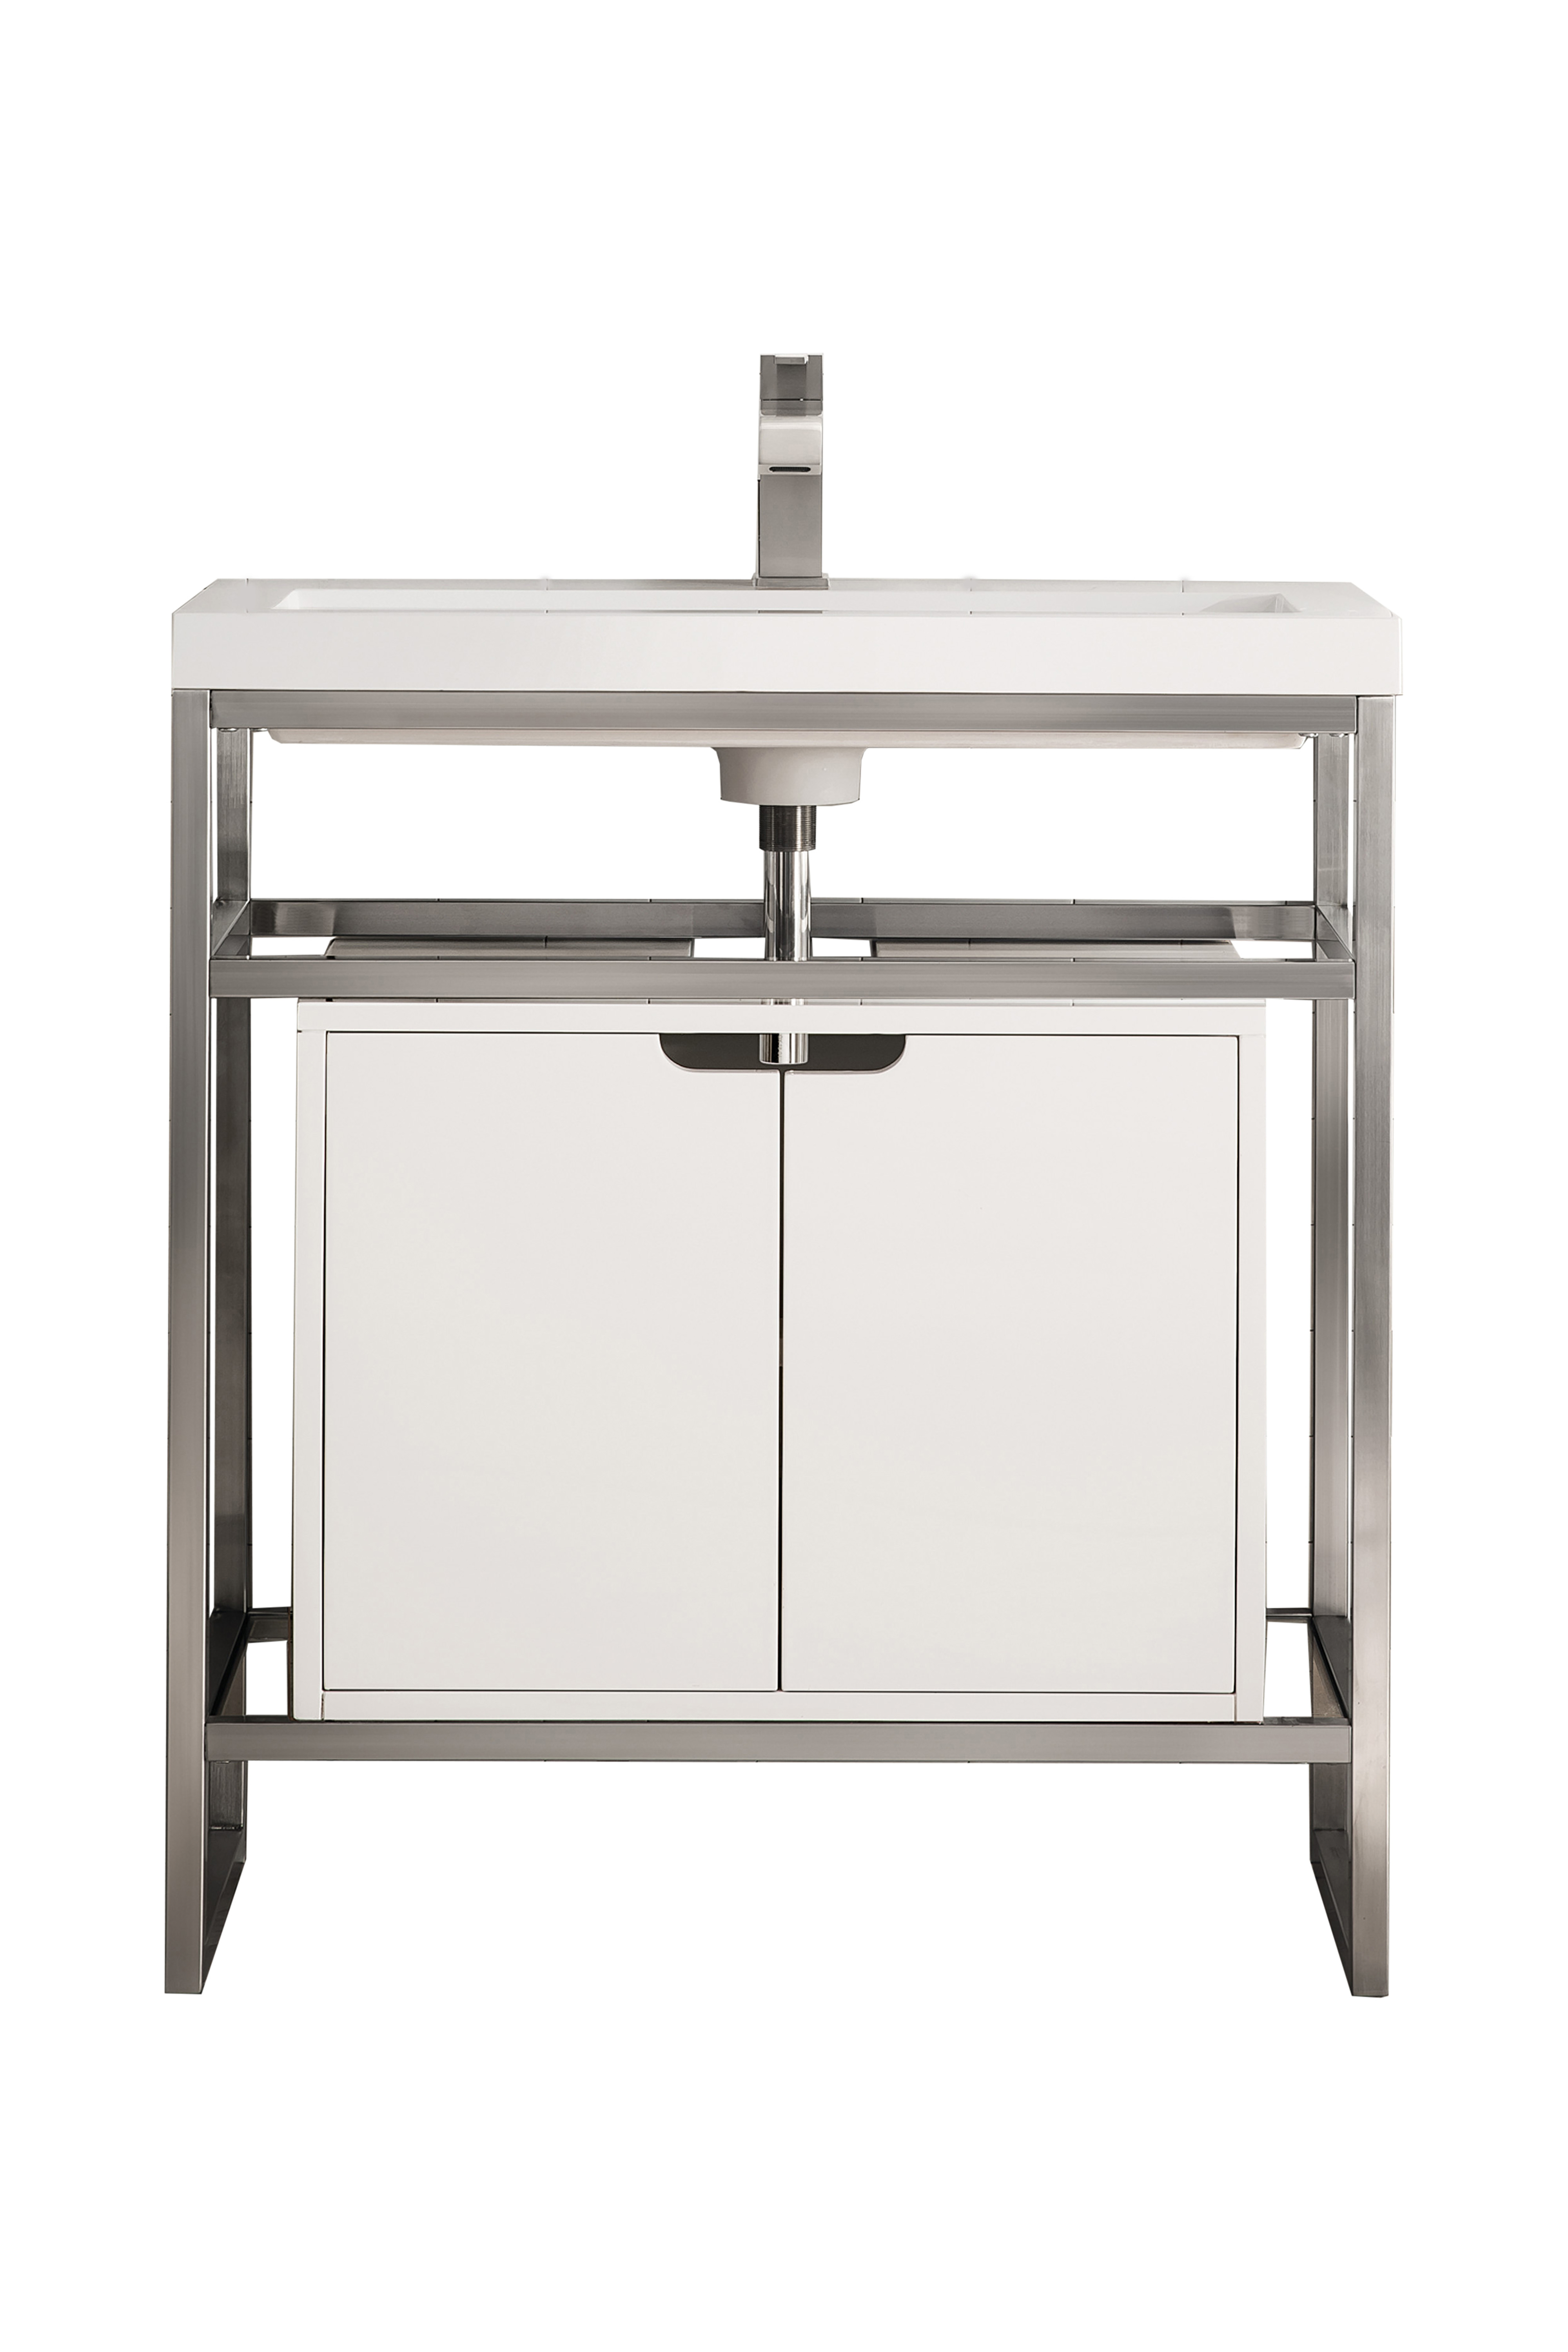 James Martin C105V31.5BNKSCGWWG Boston 31.5" Stainless Steel Sink Console, Brushed Nickel w/ Glossy White Storage Cabinet, White Glossy Composite Countertop